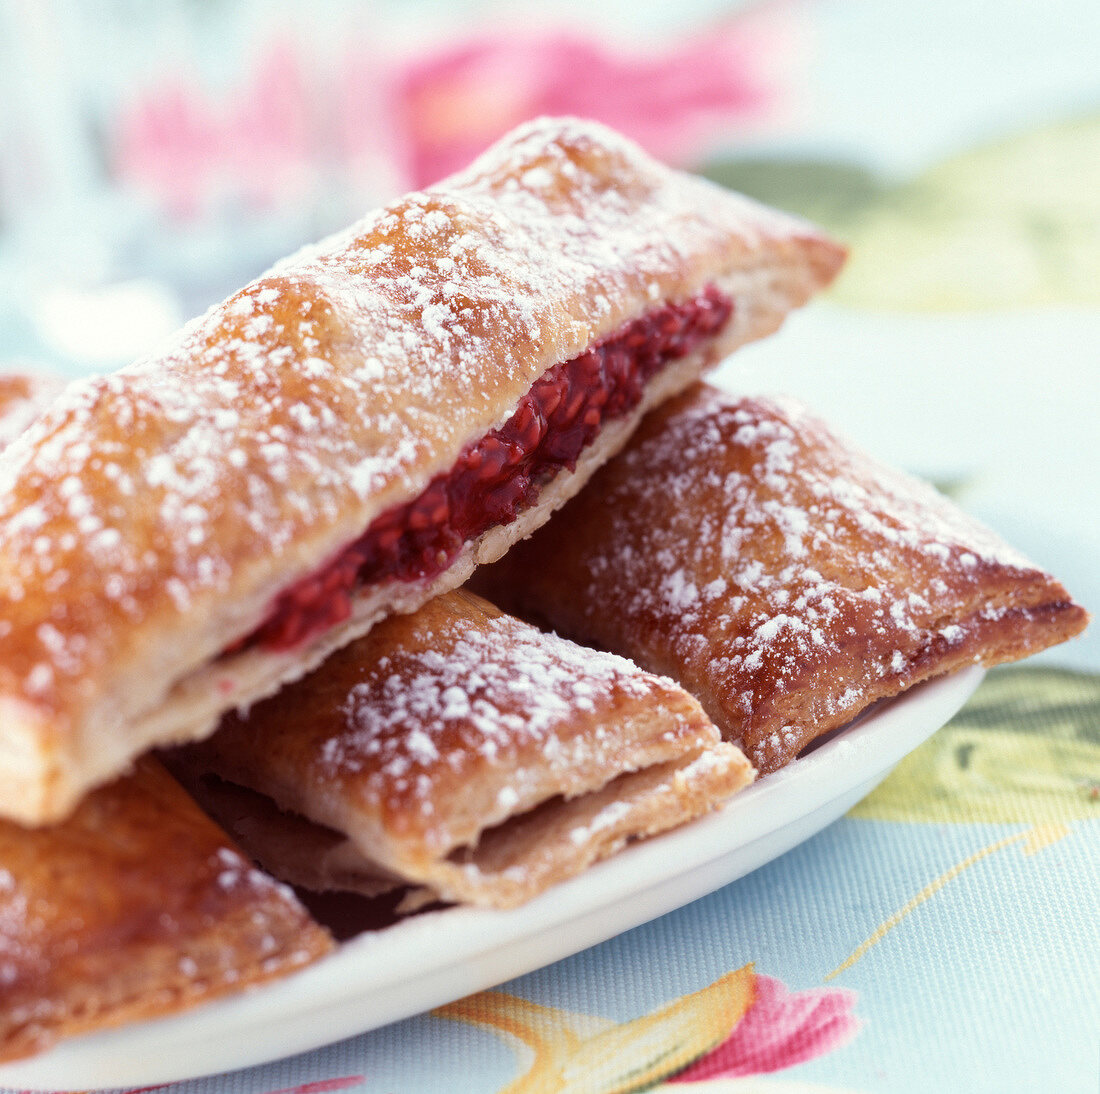 Raspberries in crunchy pastry with chocolate